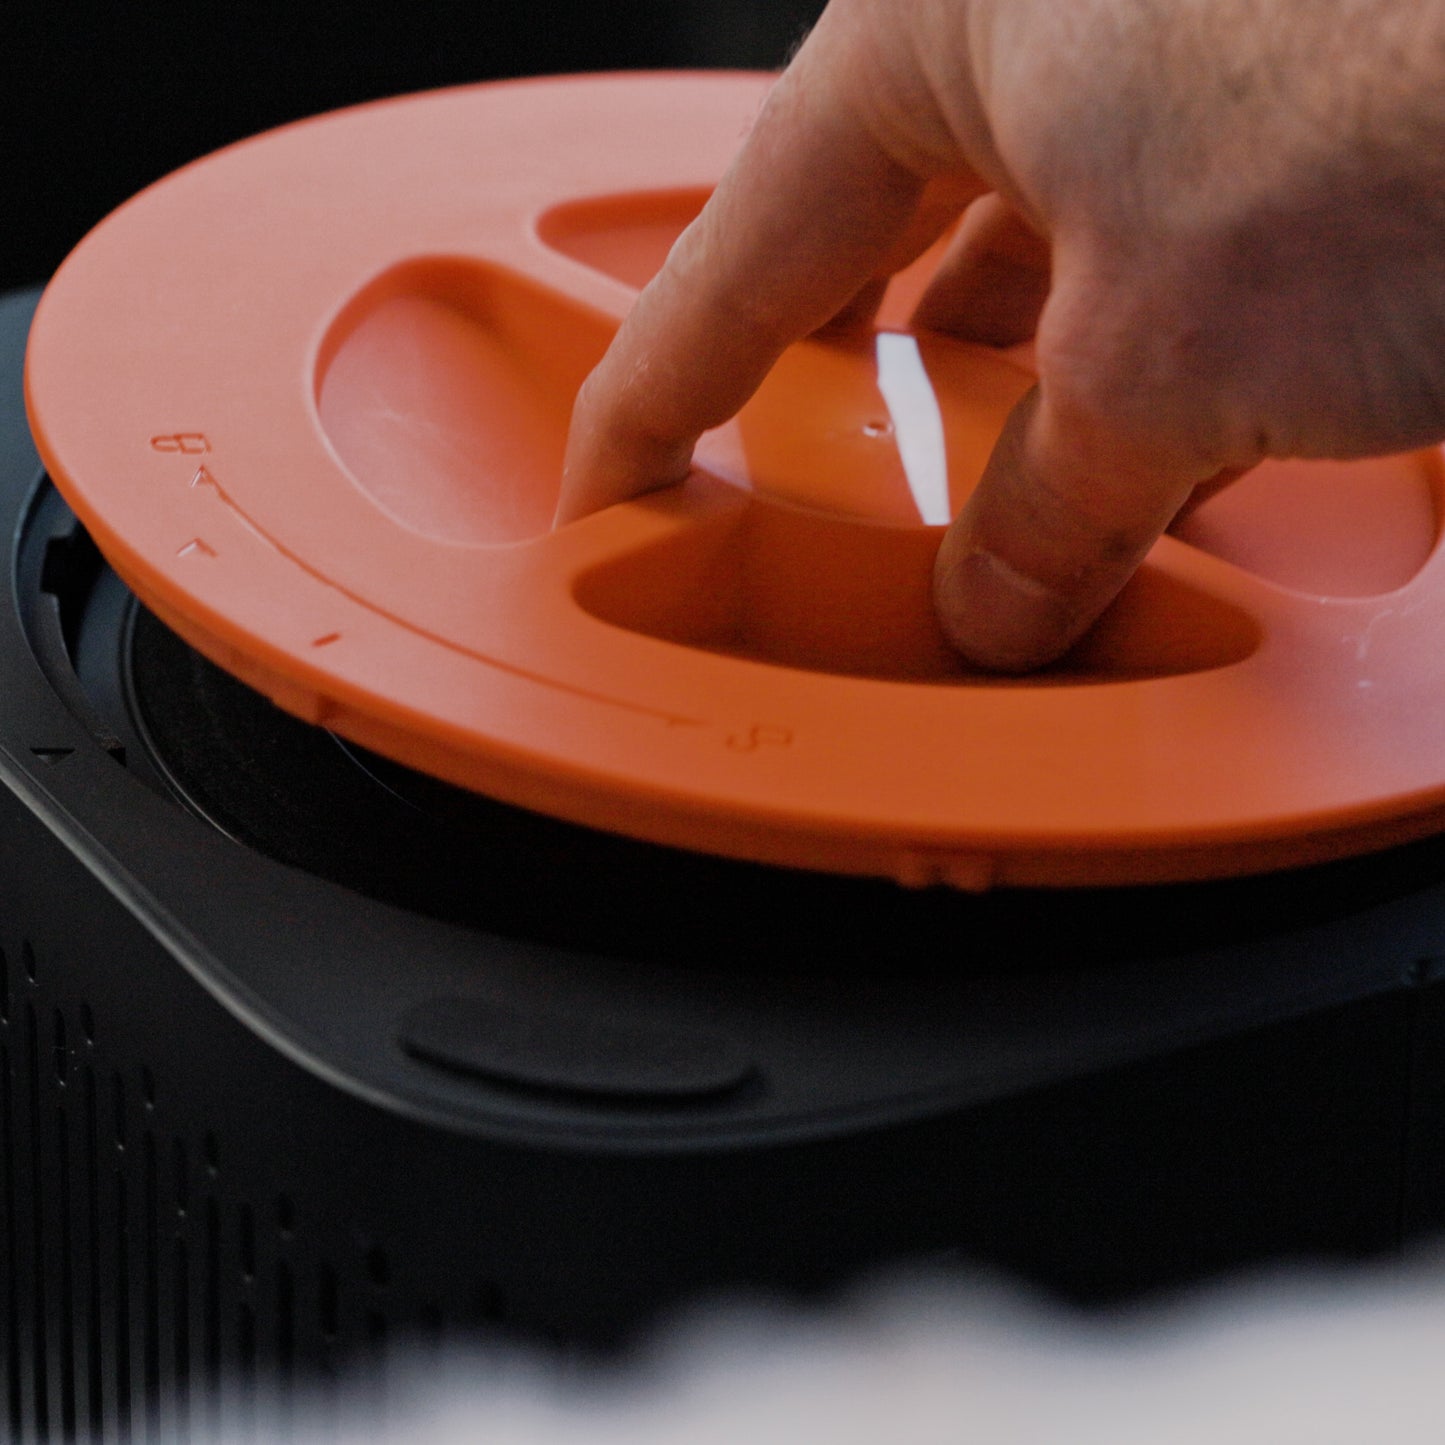 Hand removing the air filter cover on a Wyze Air Purifier.